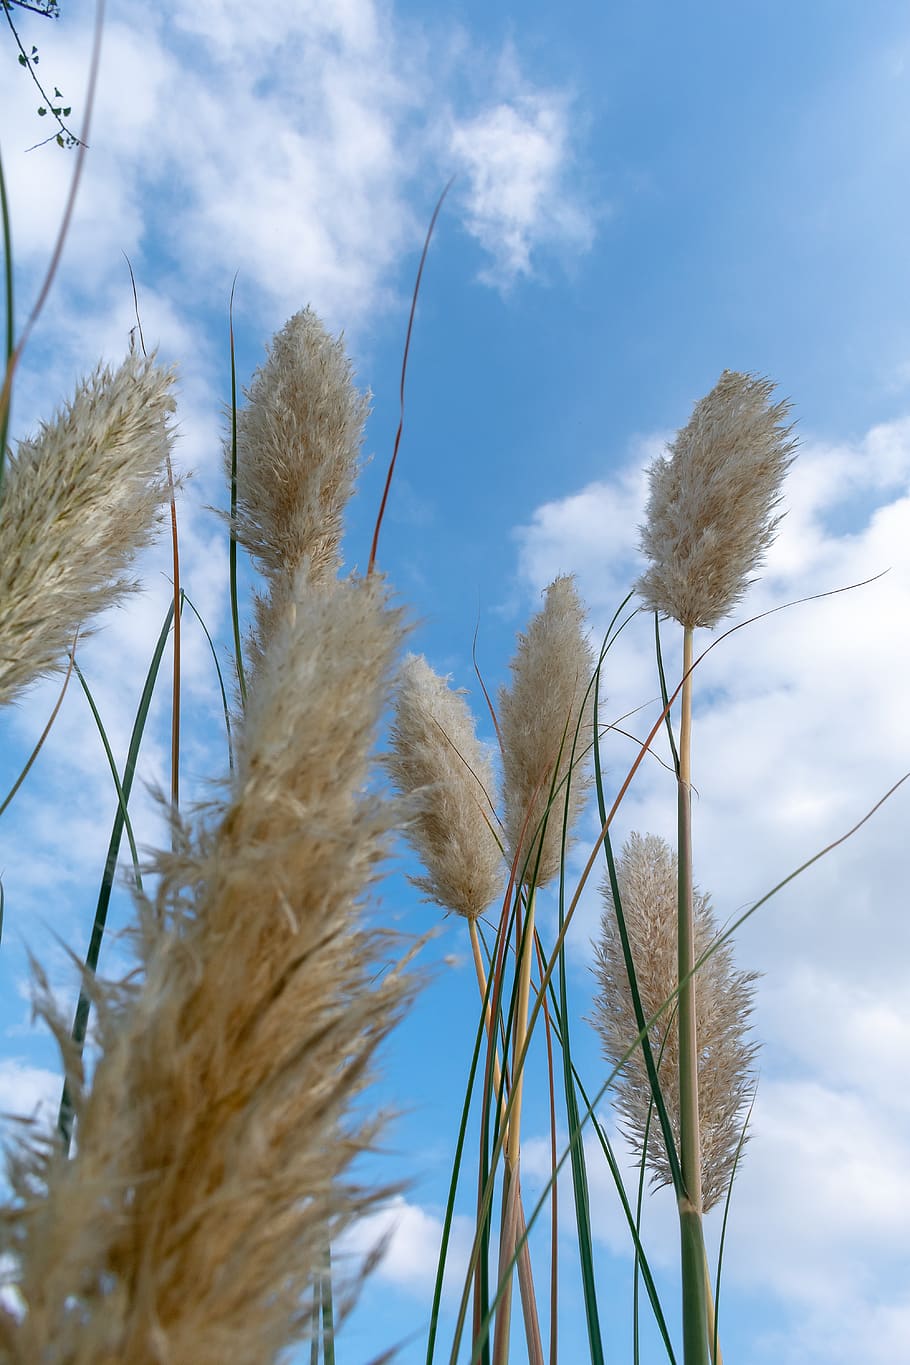 grass, thatched, thatched flower, mao needle, villi, soft, white, plant, growth, sky